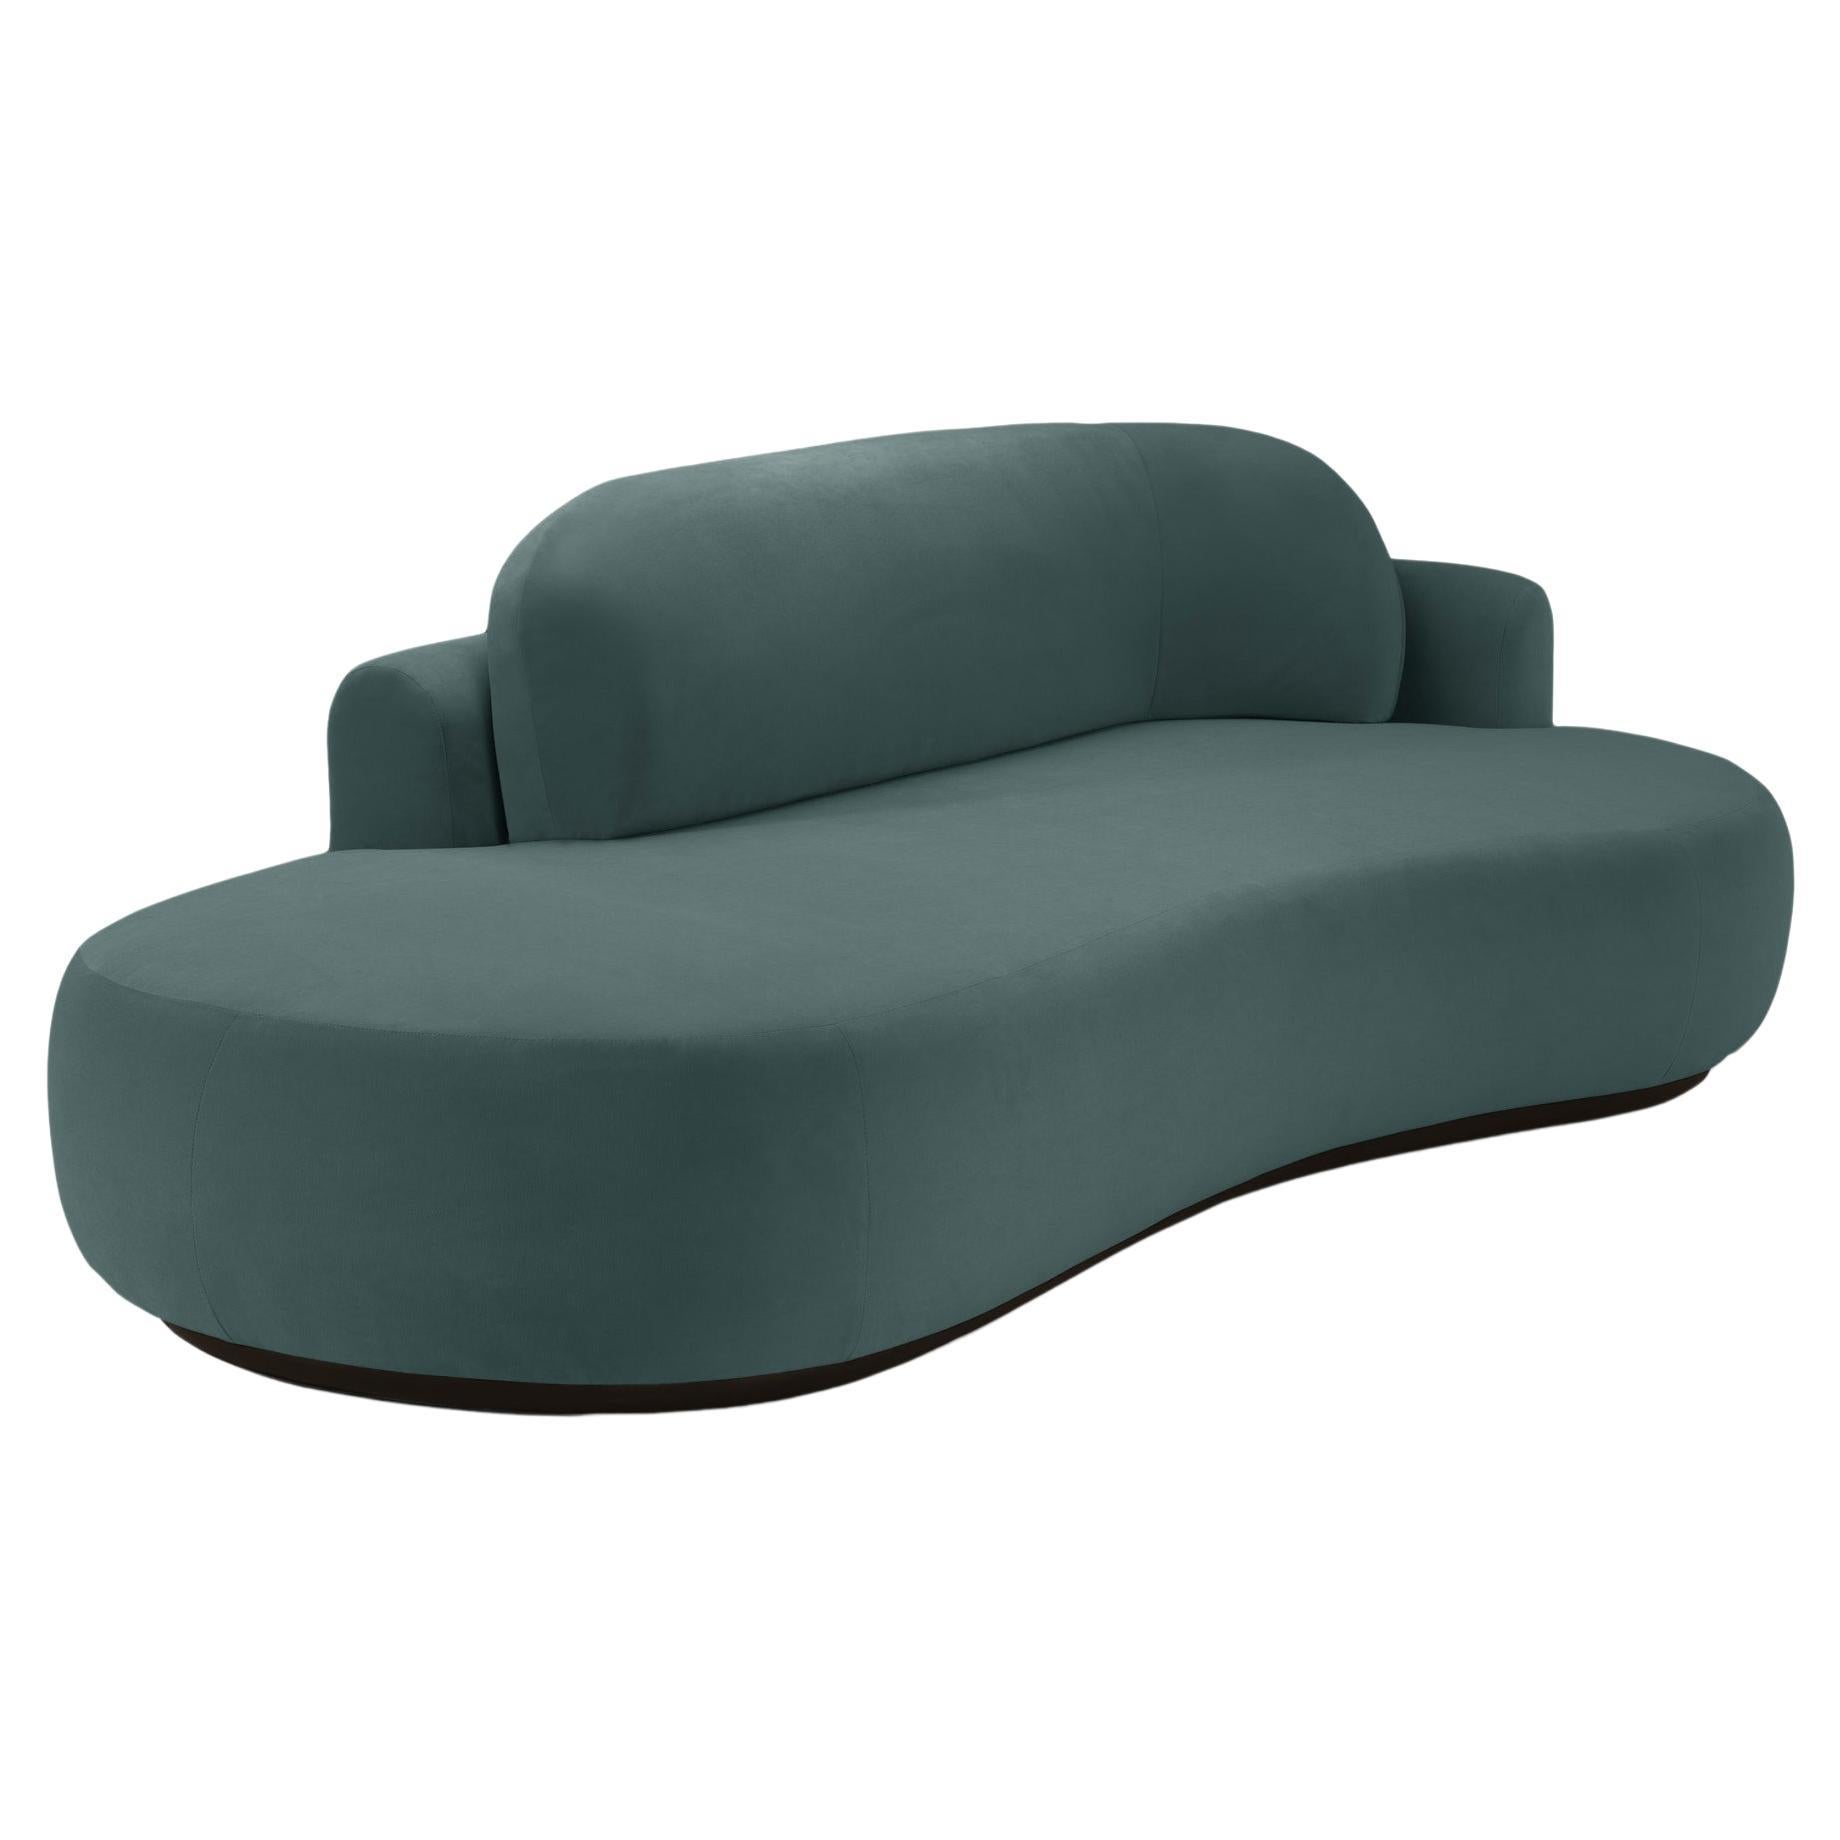 Naked Curved Sofa Single with Beech Ash-056-5 and Teal For Sale